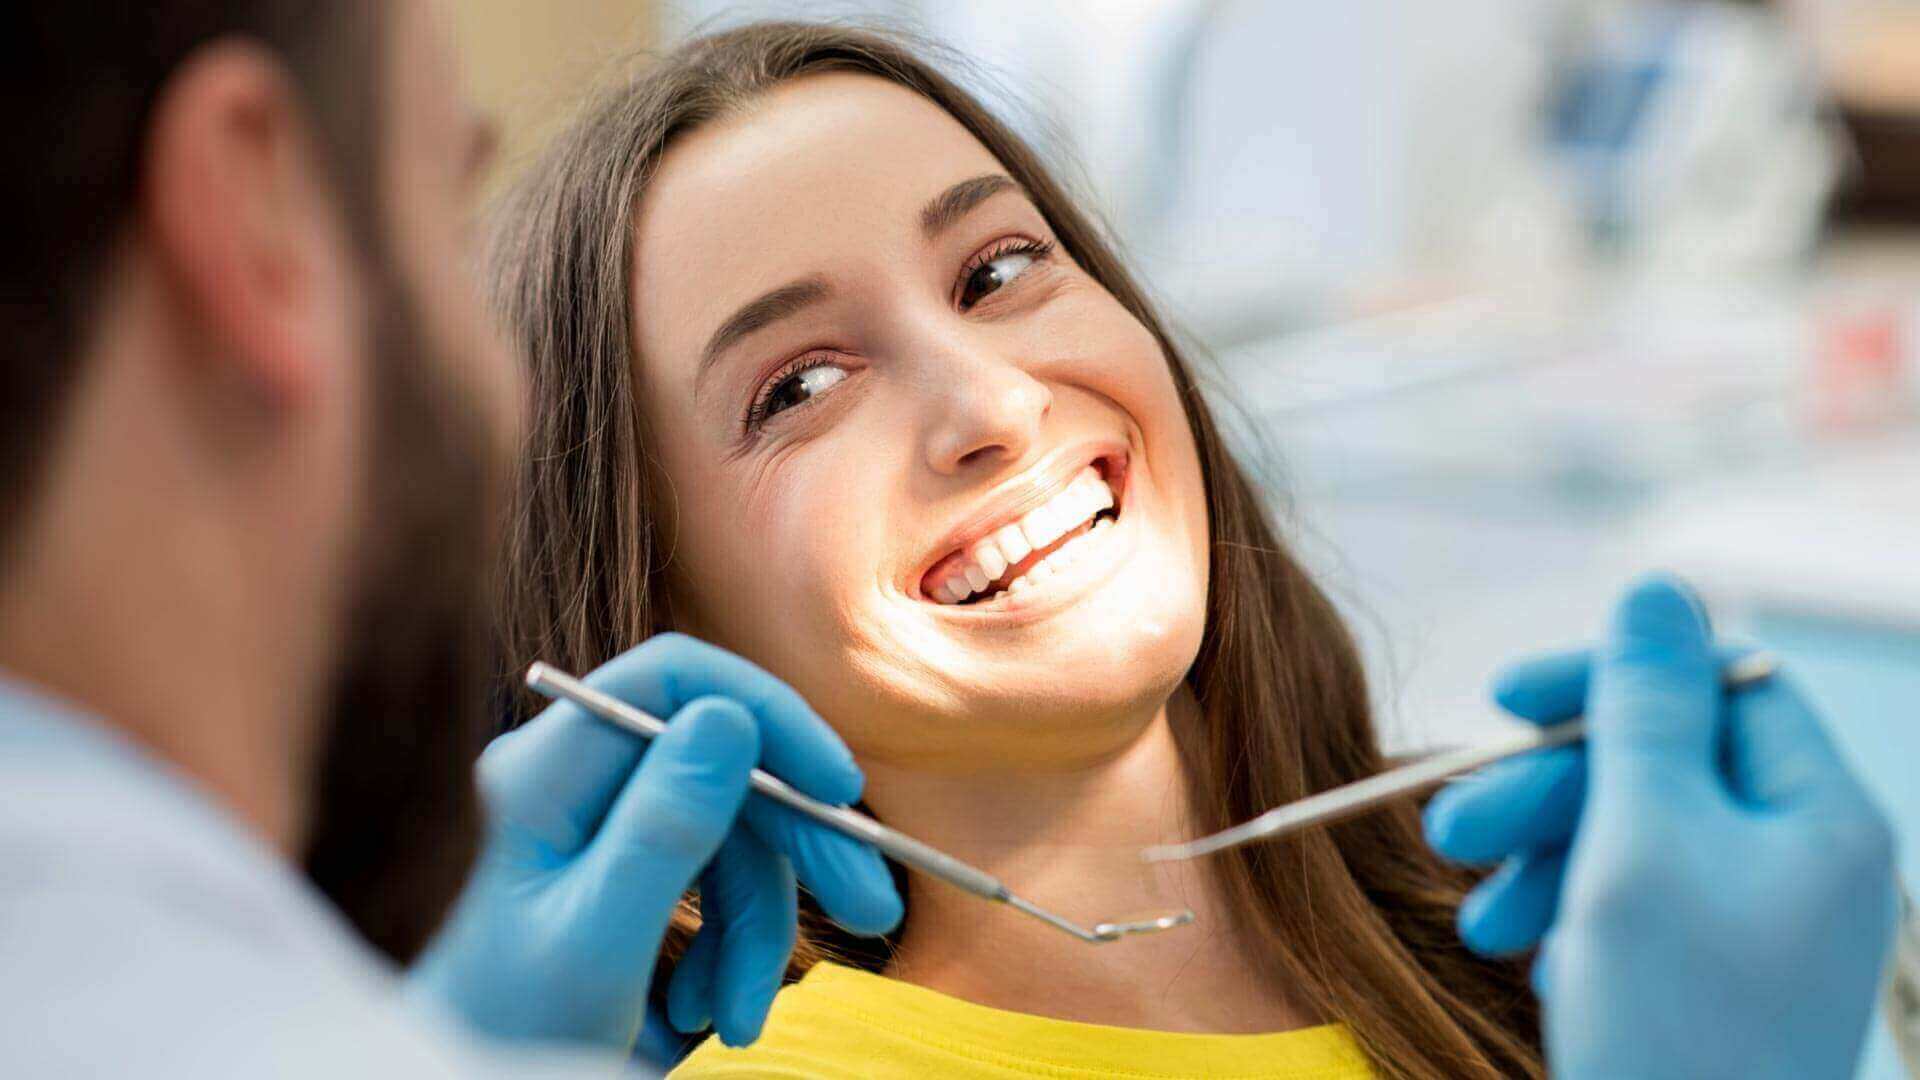 The patient smile with dentist